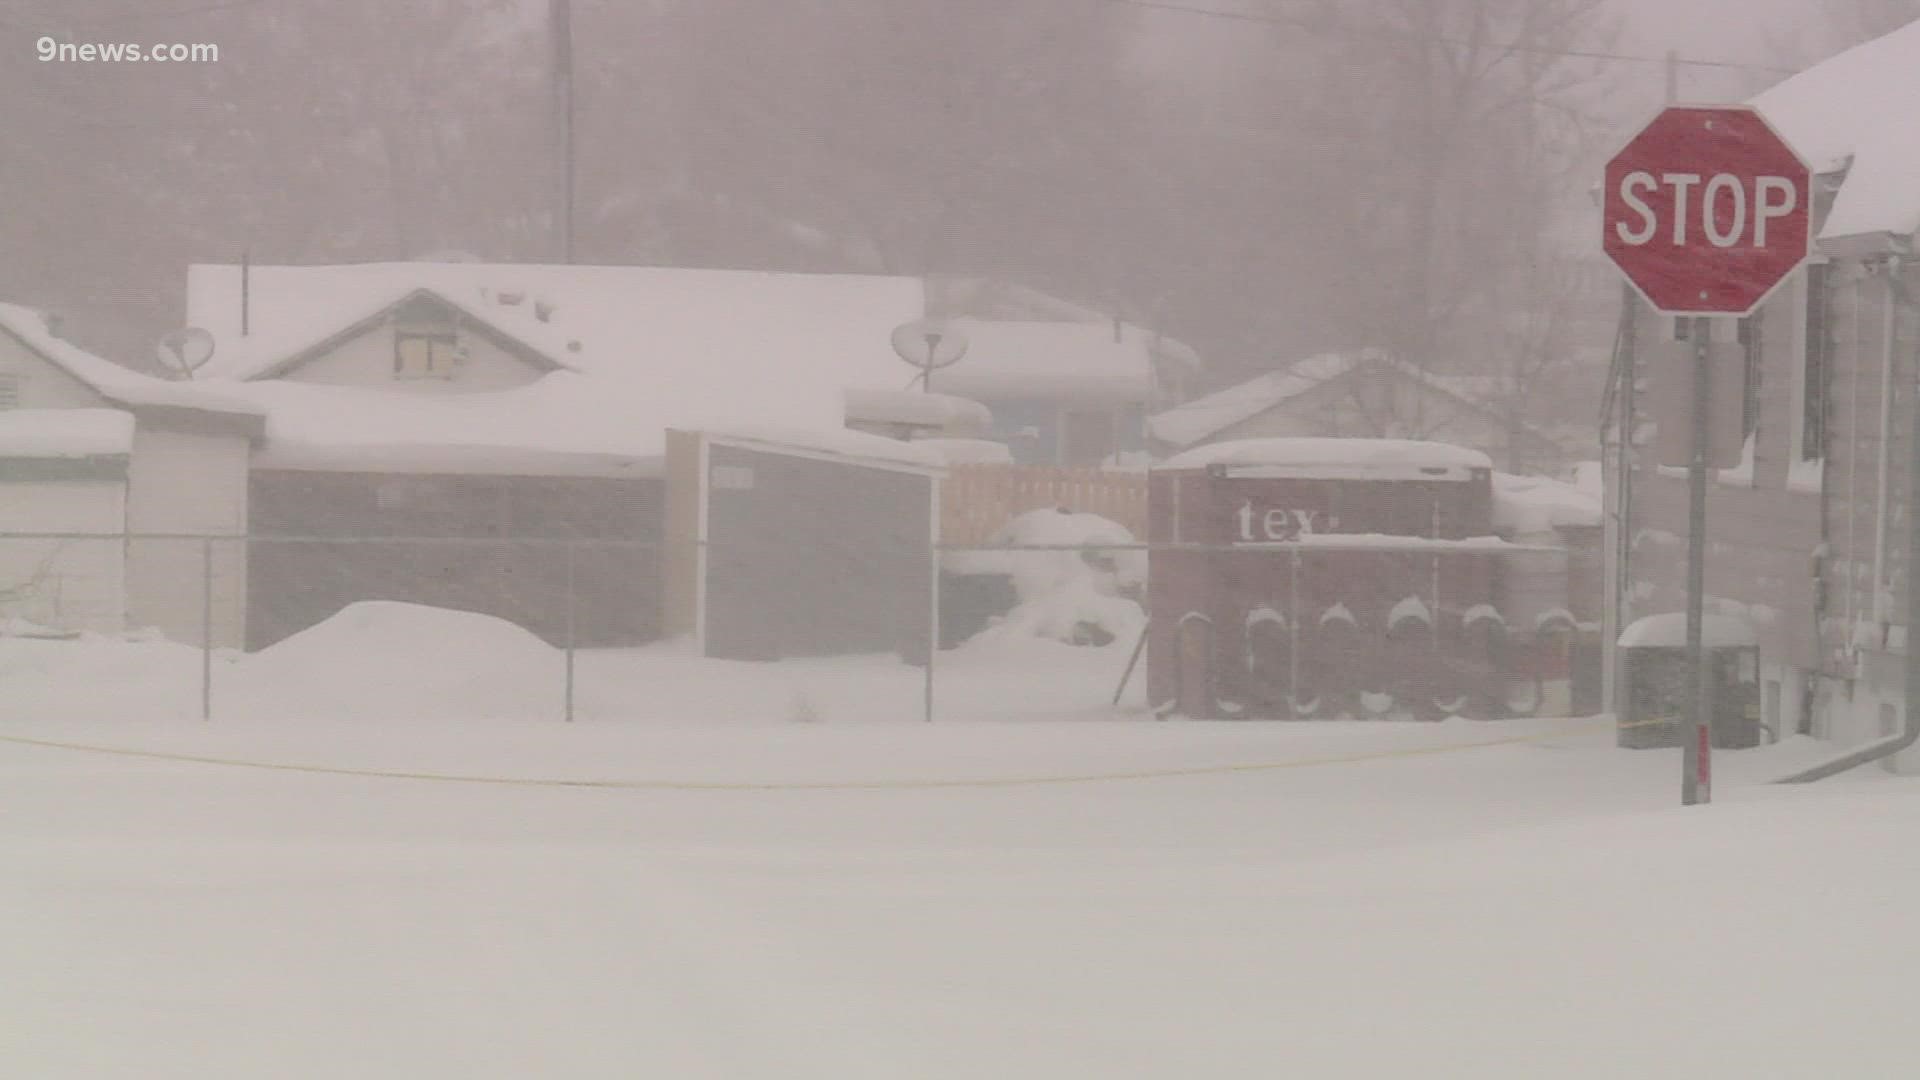 Meteorologist Cory Reppenhagen explains why some areas got more snow than others.